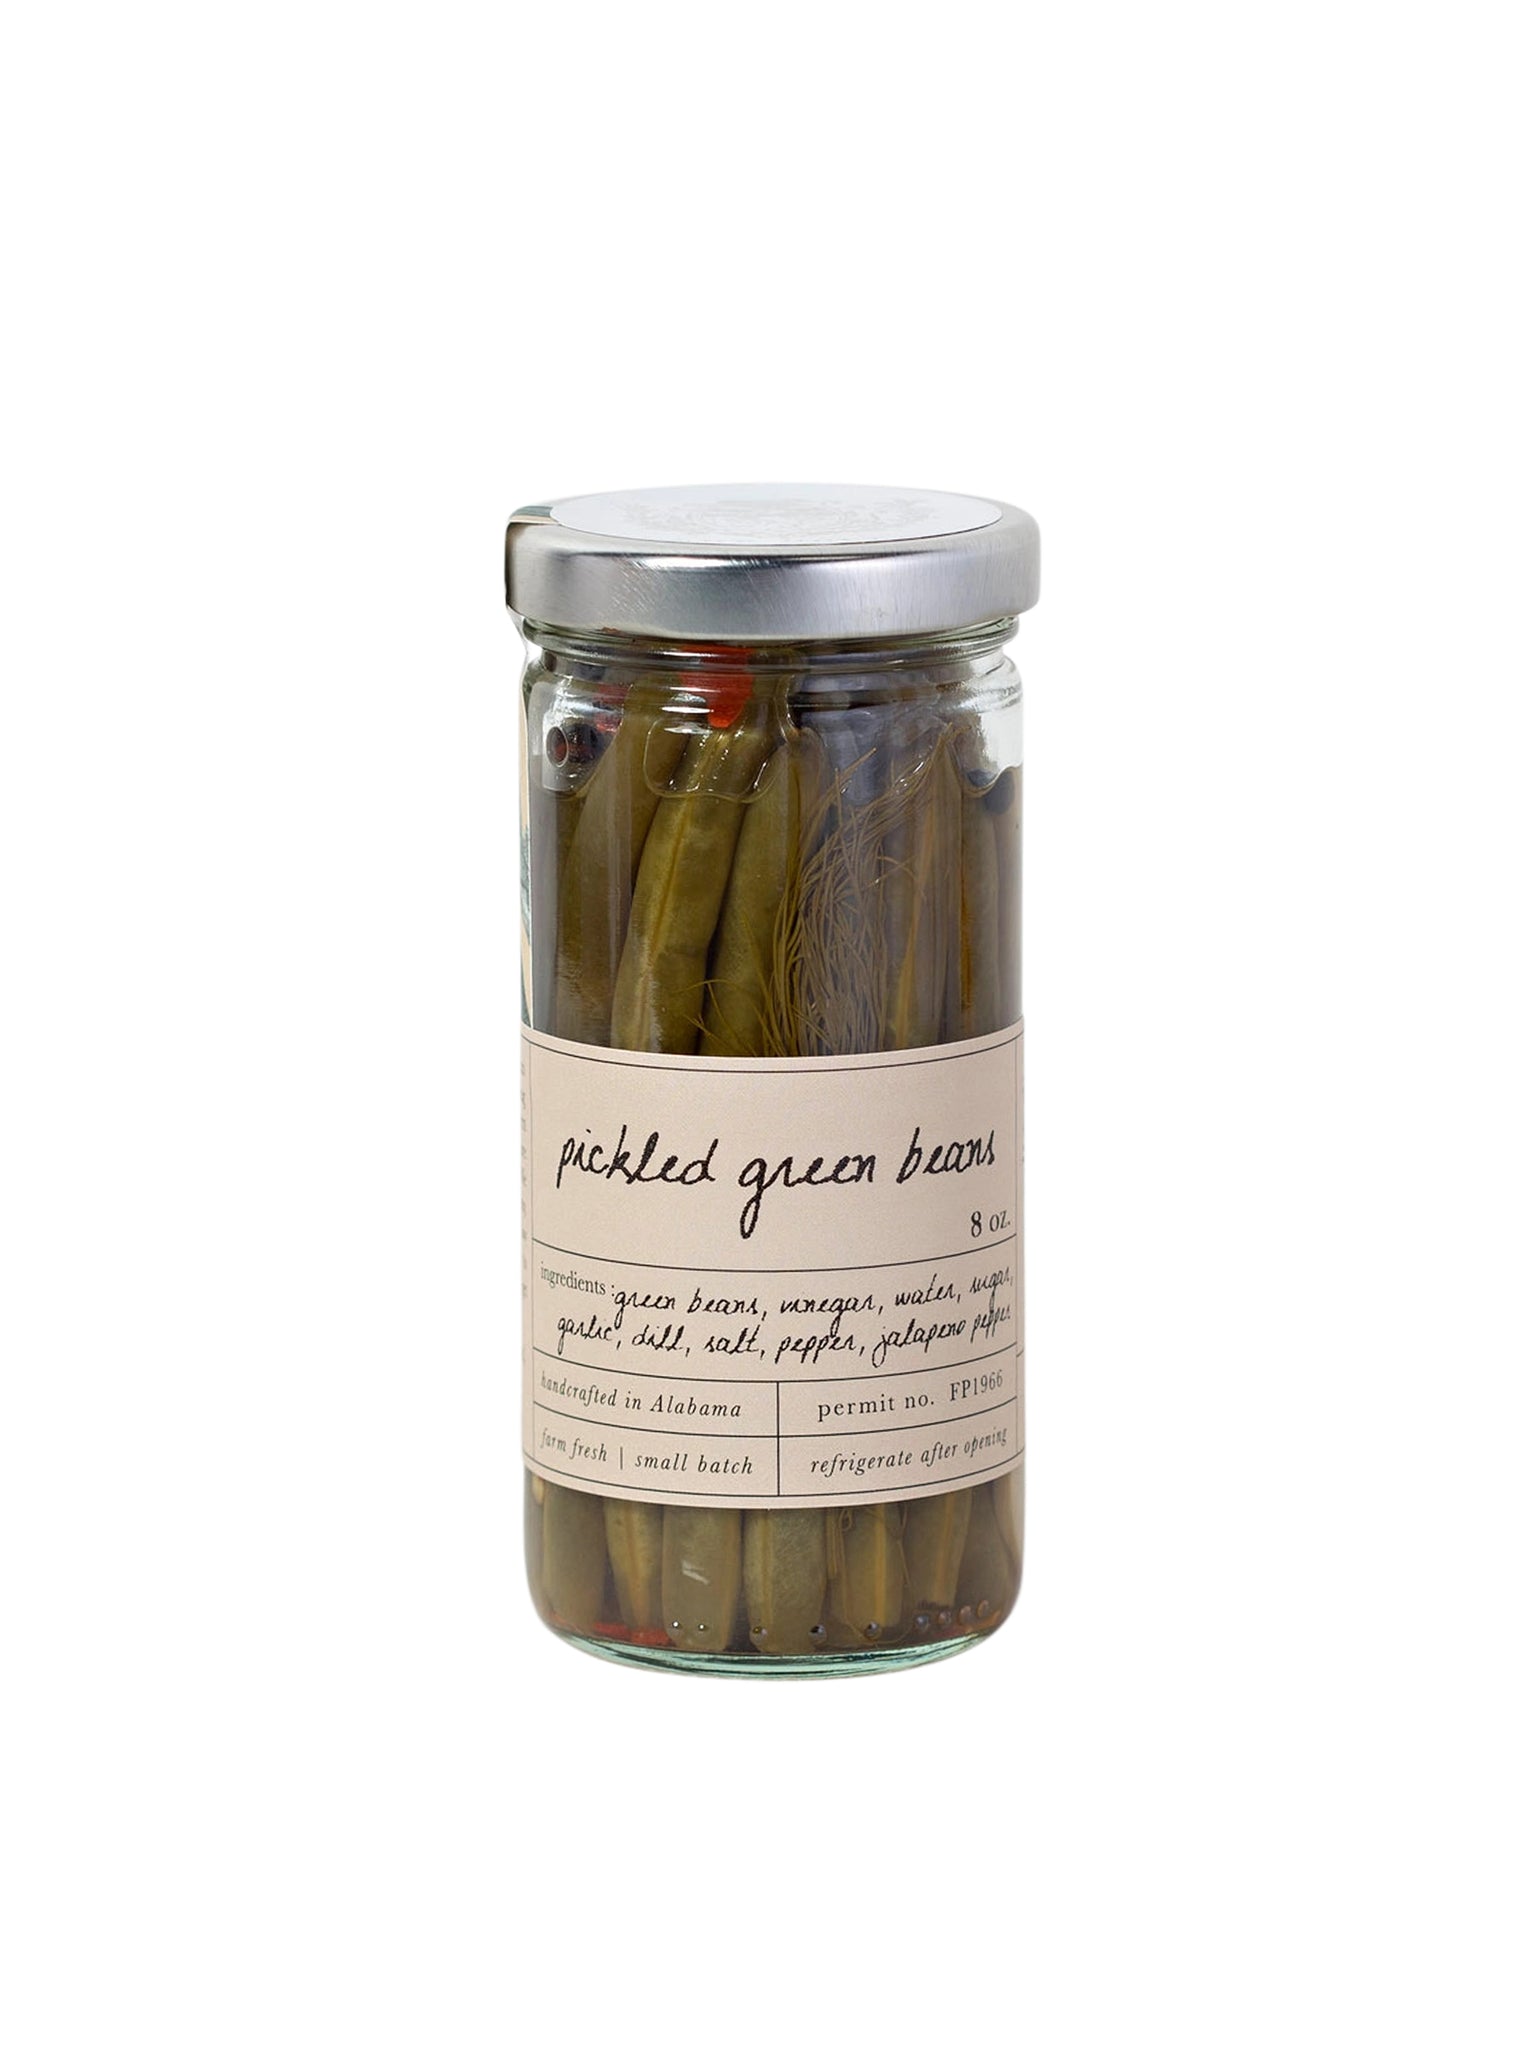 Stone Hollow Farmstead Pickled Green Beans Weston Table